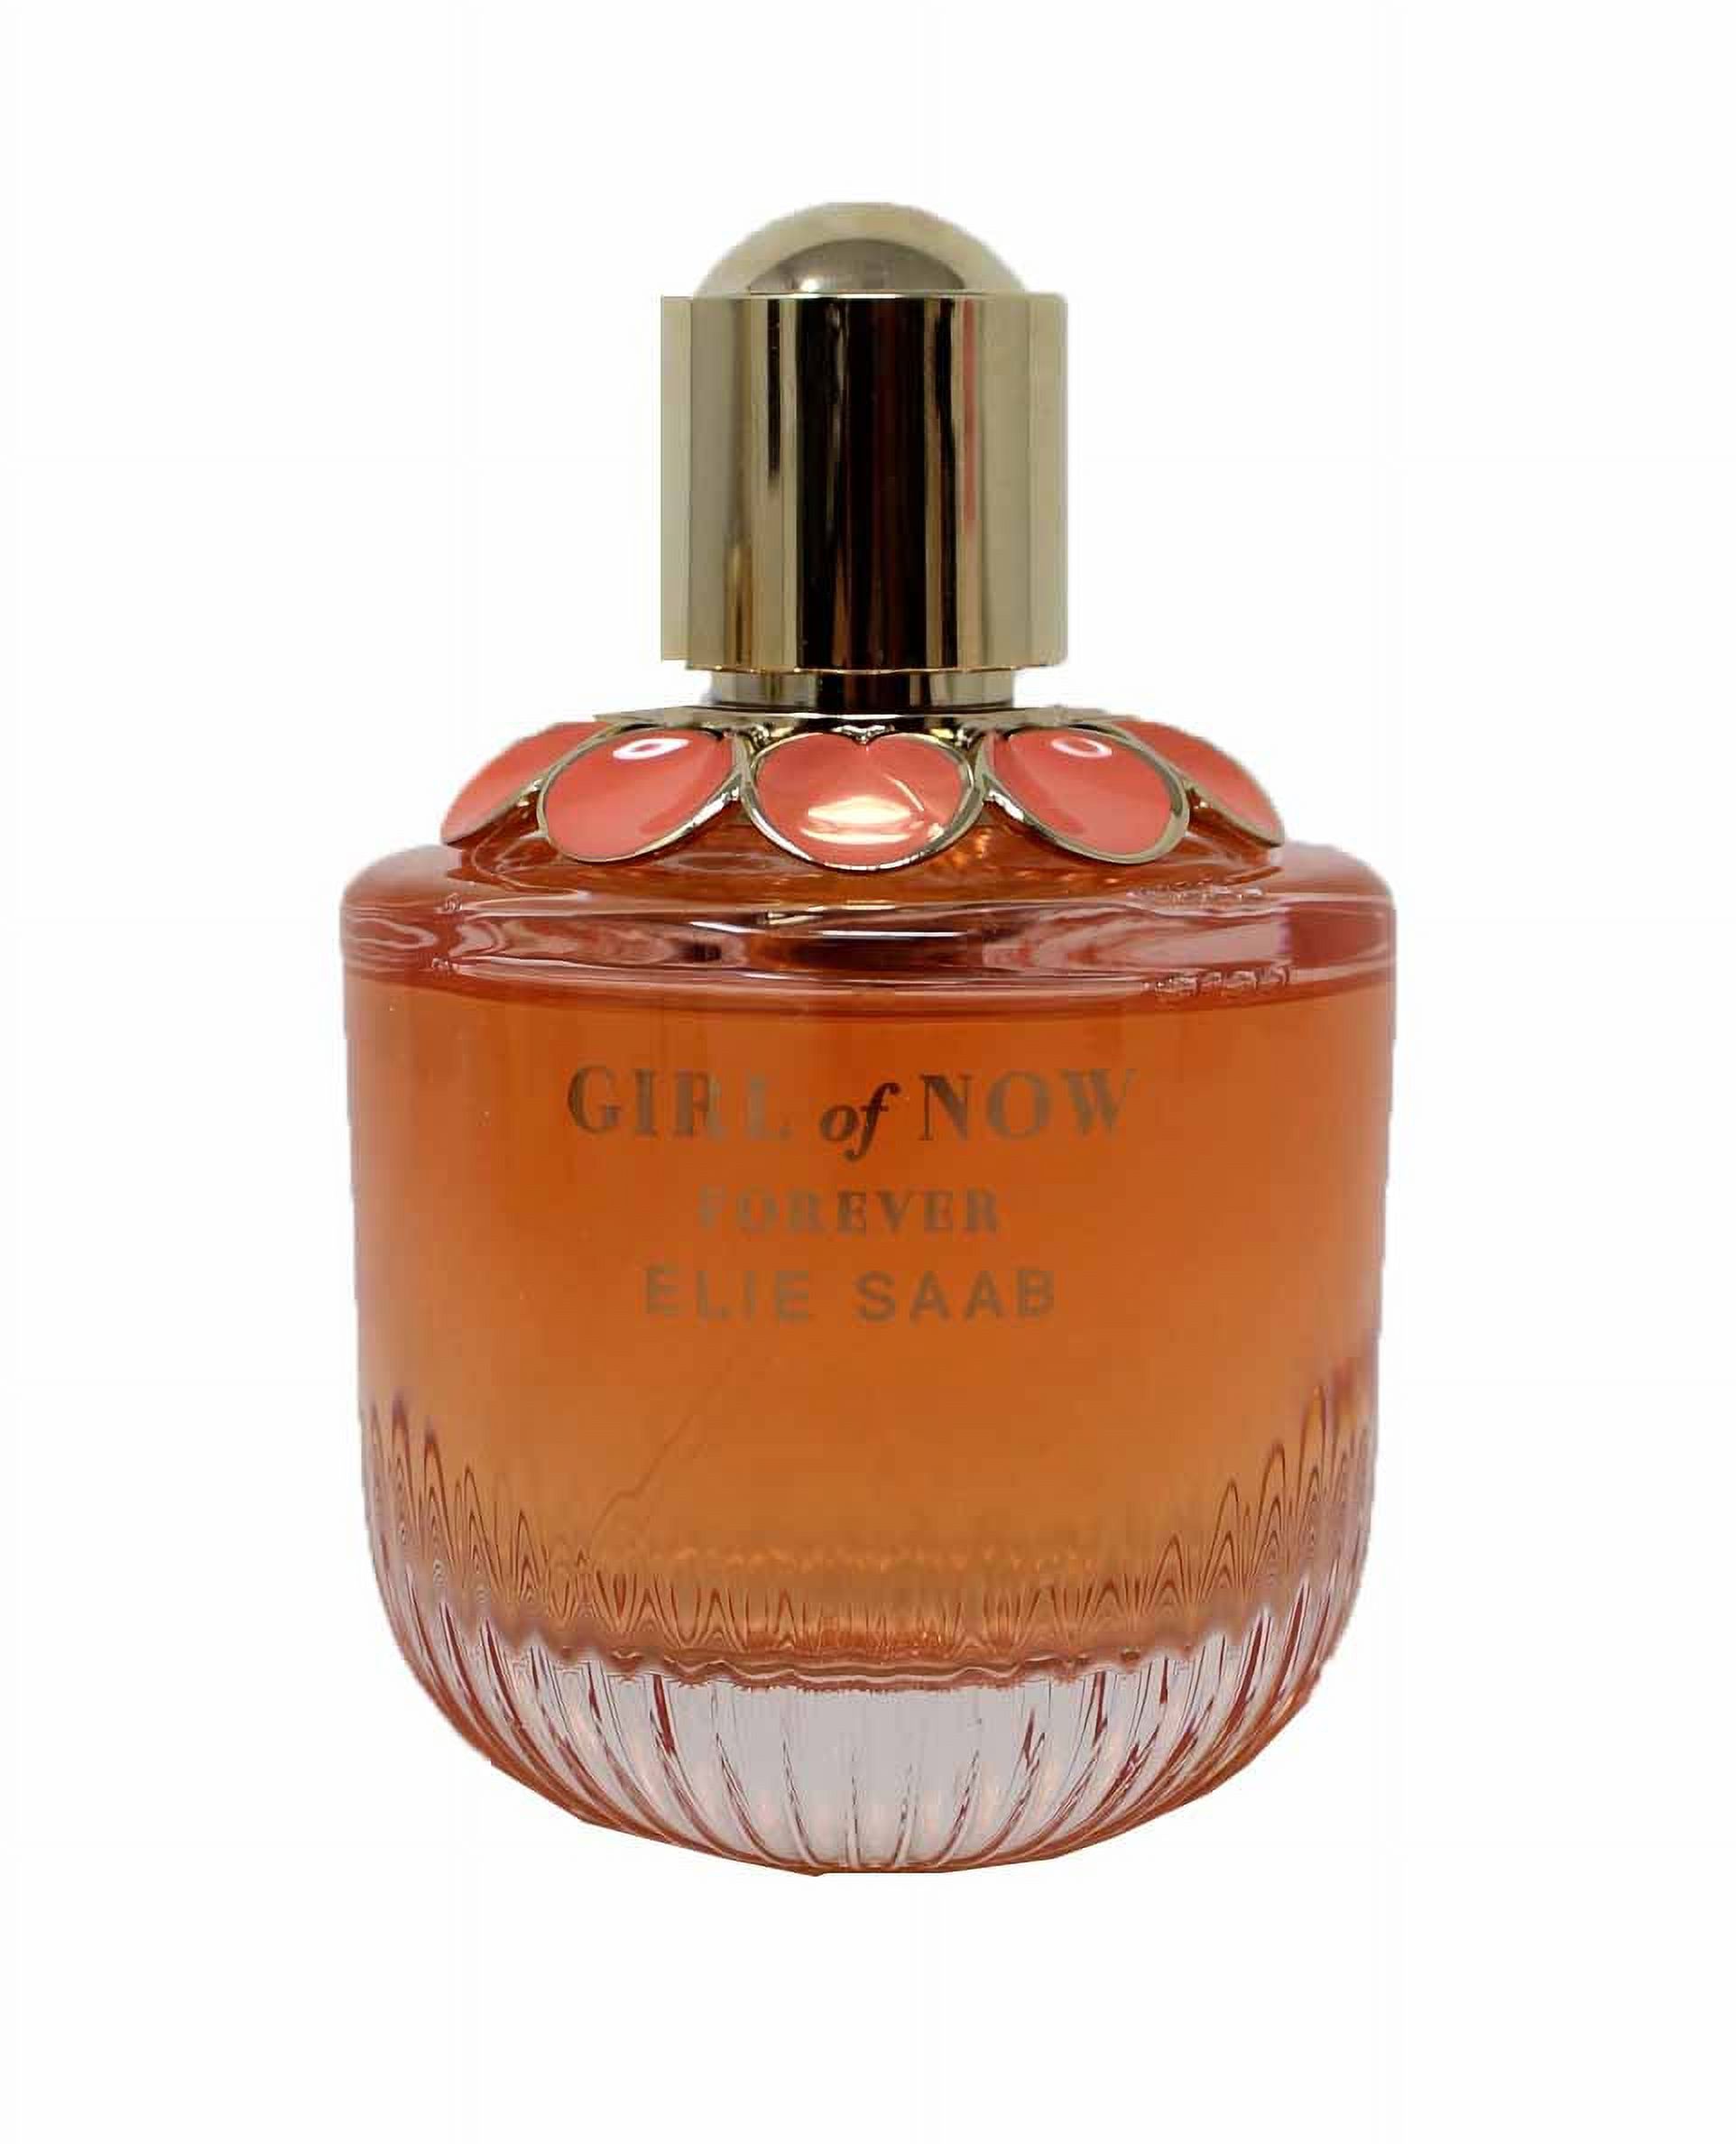 Girl of Now Forever by Elie Saab Eau De Parfum Spray 3 oz for Women - image 2 of 2